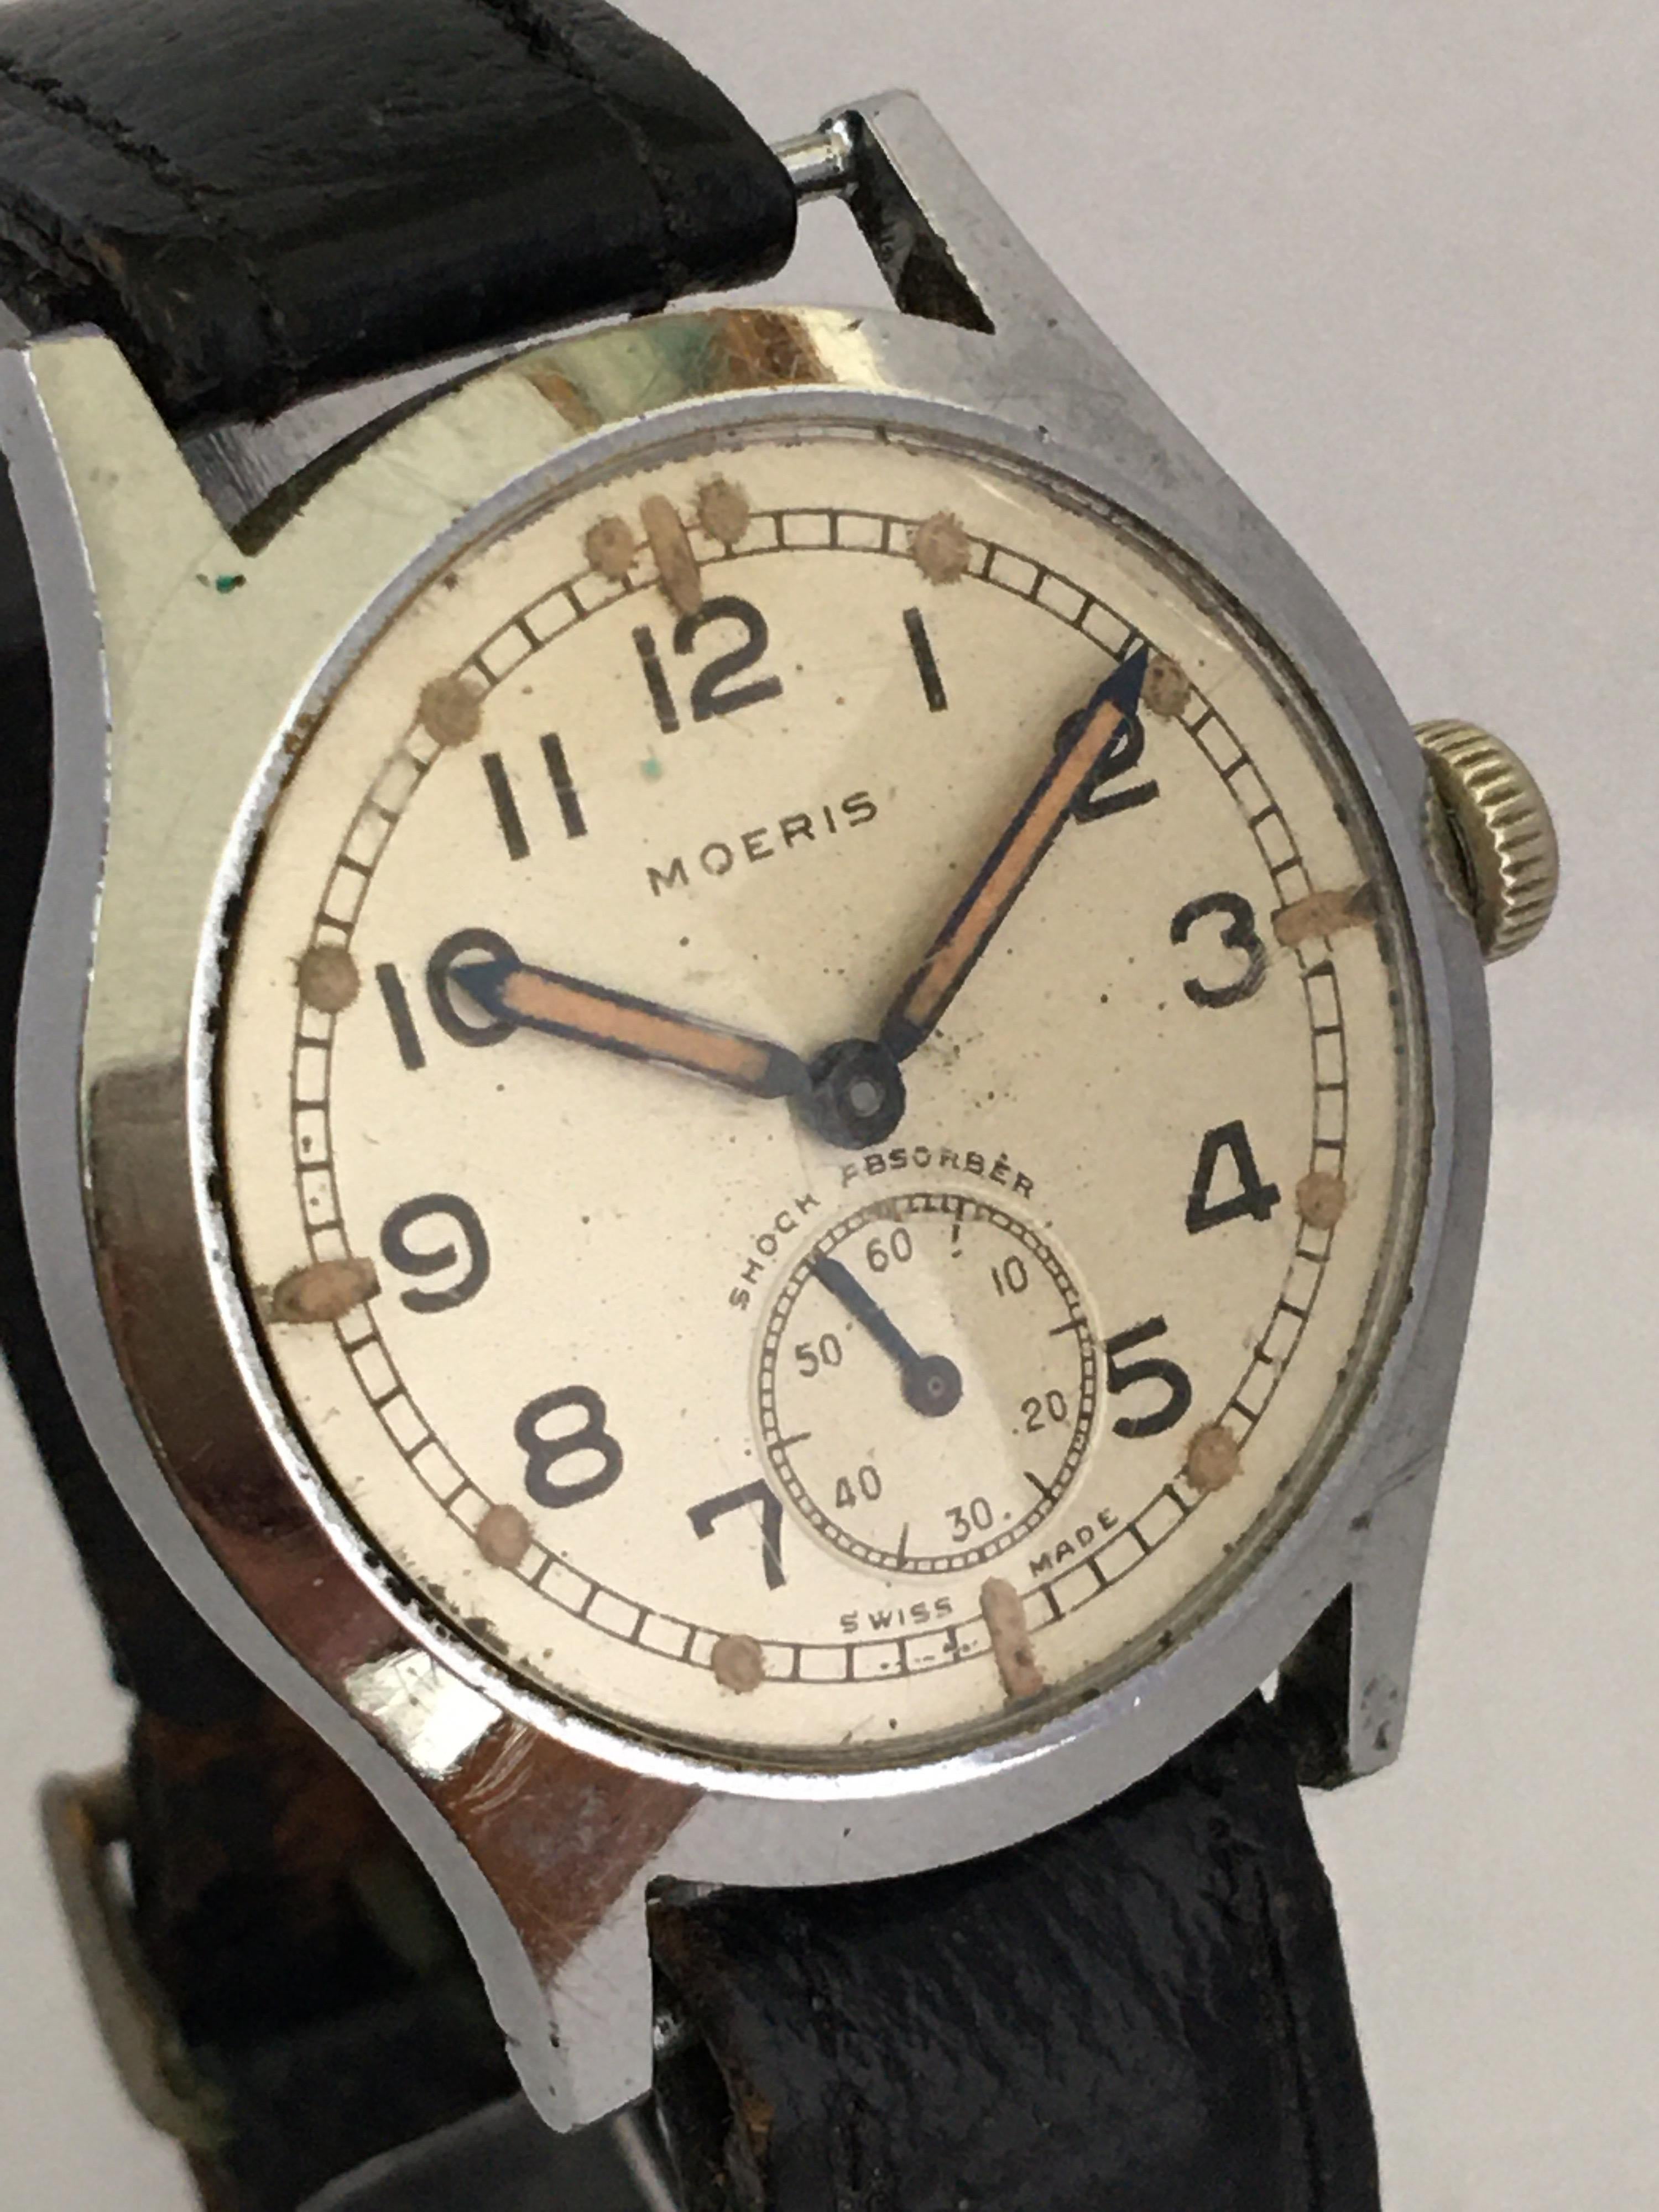 This vintage mechanical Swiss movement Military Watch is working and it is ticking and running well.
Visible signs of ageing and wear as shown. The black leather strap is worn. Please study the images carefully as form part of the description.

